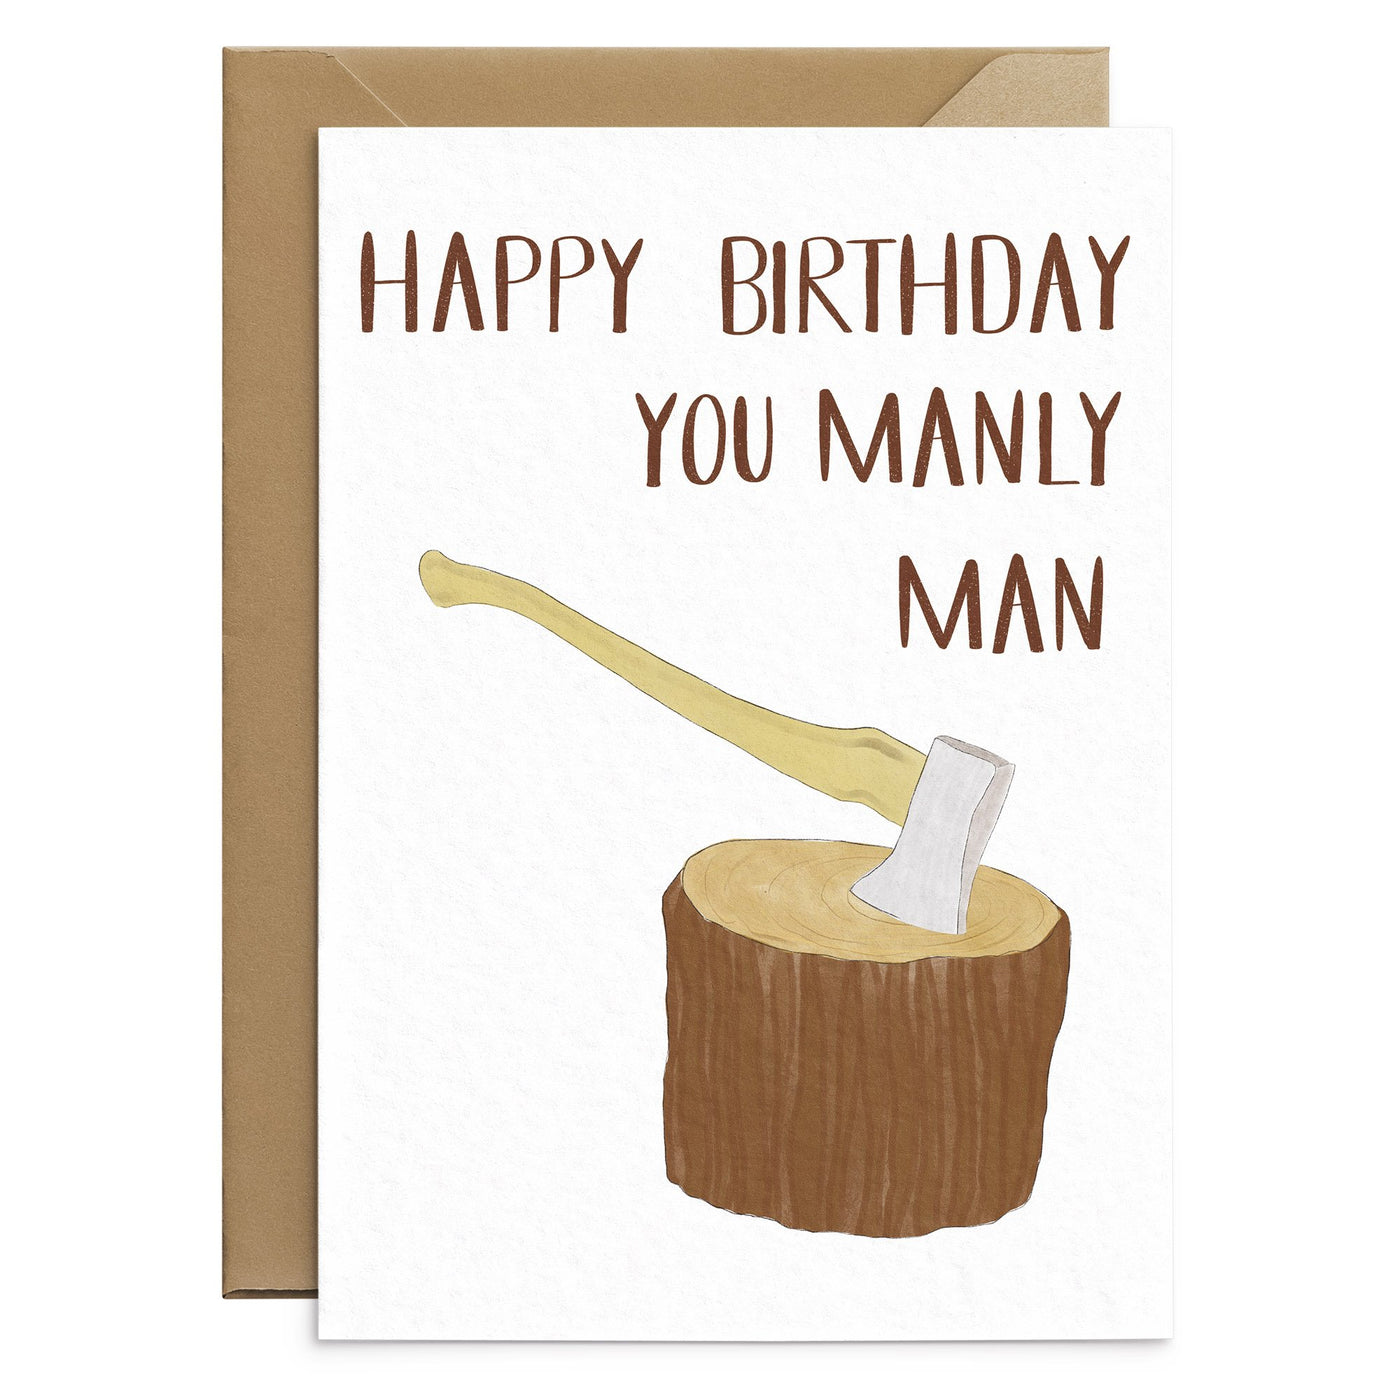 Manly Man Birthday Card - Poppins & Co.